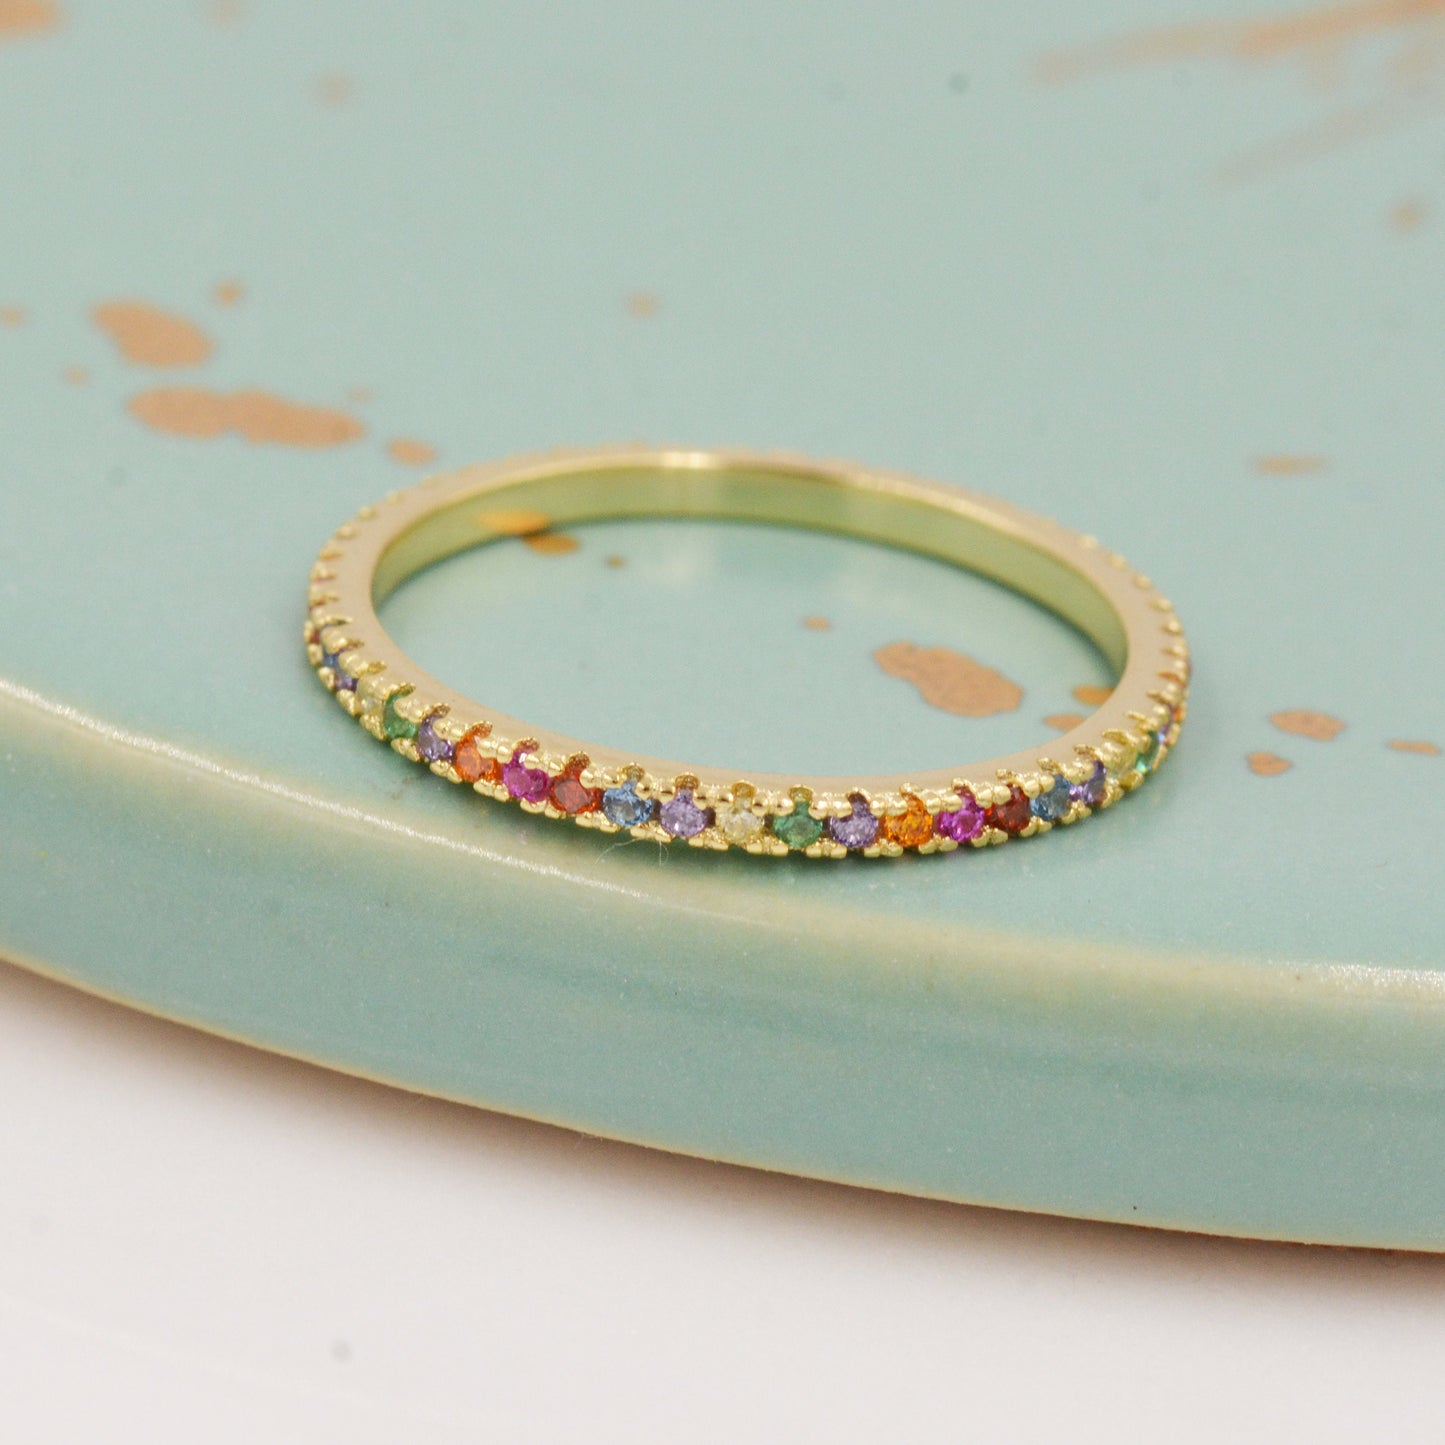 Skinny Rainbow Crystal Pave Ring in Sterling Silver, Gold Vermeil Crystal Pave Ring, Stacking Rings, Eternity Ring, US 5 - 8